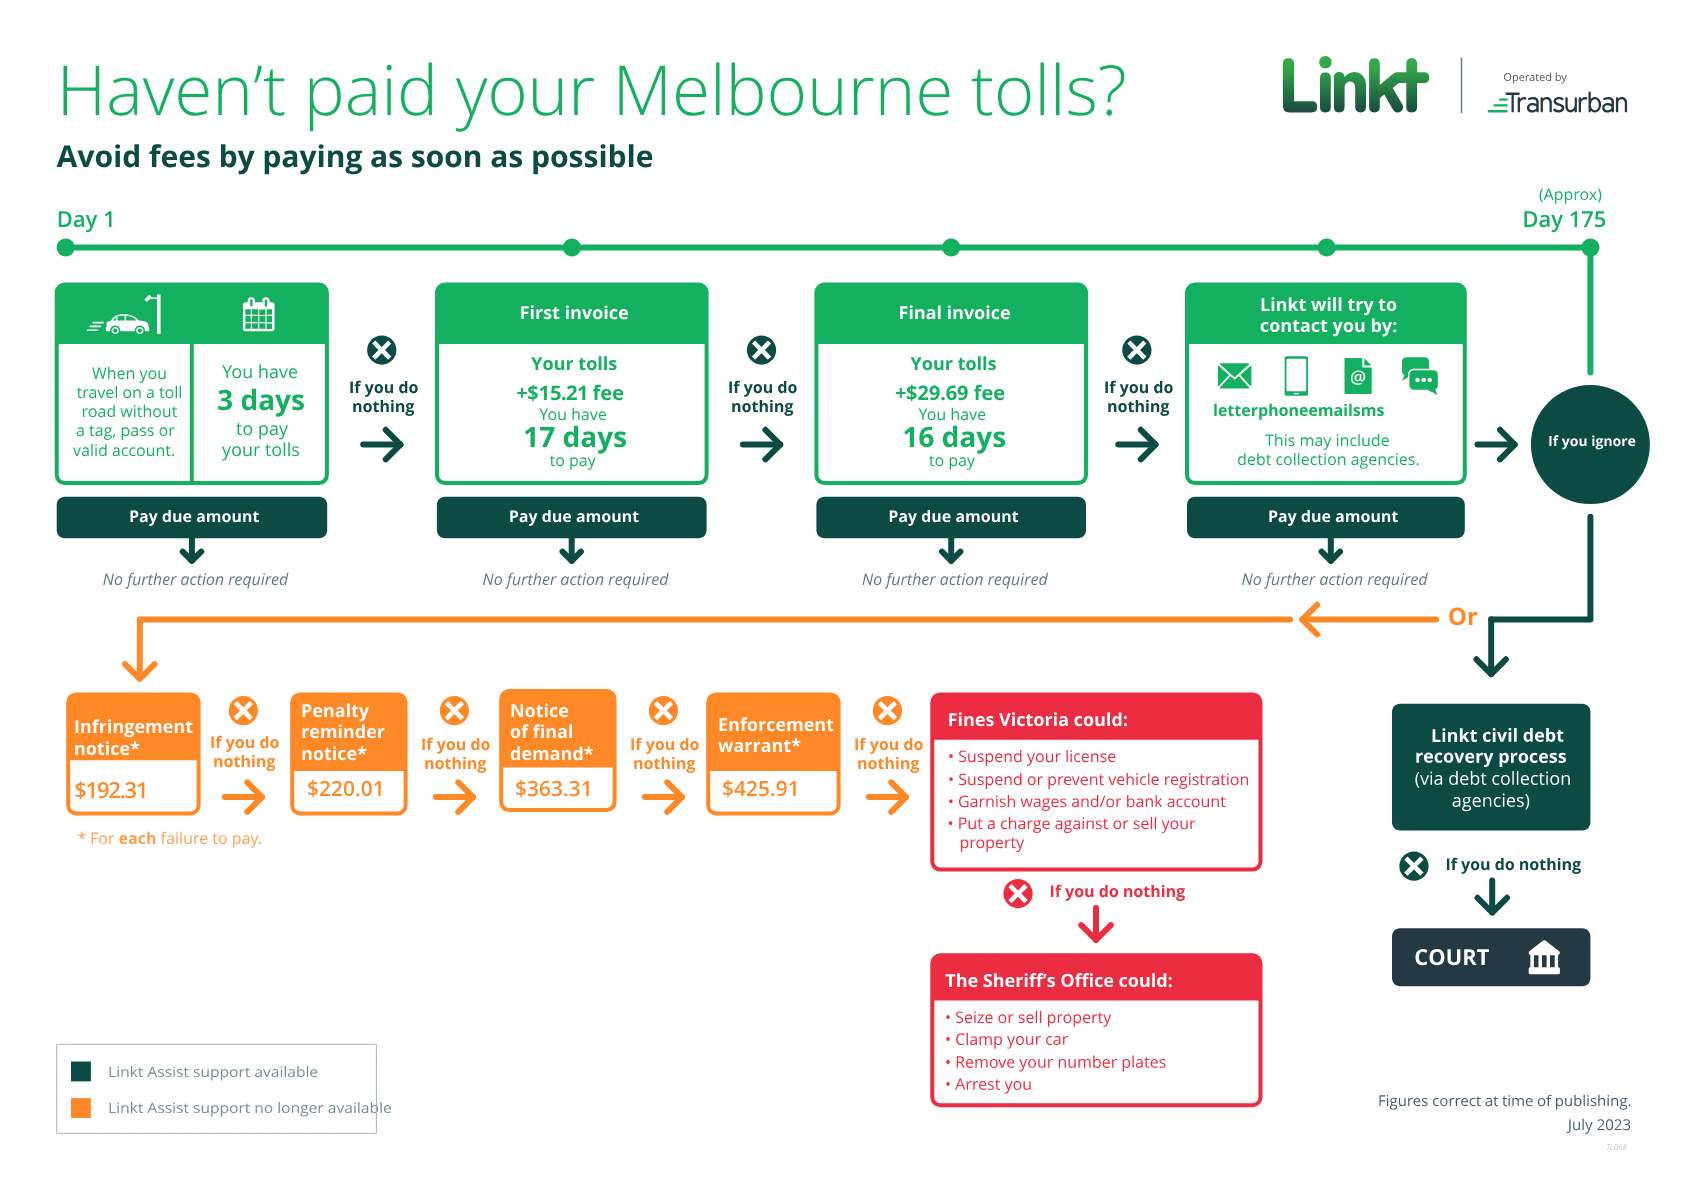 Diagram displaying timeline of payment events for unpaid tolls, text description found below